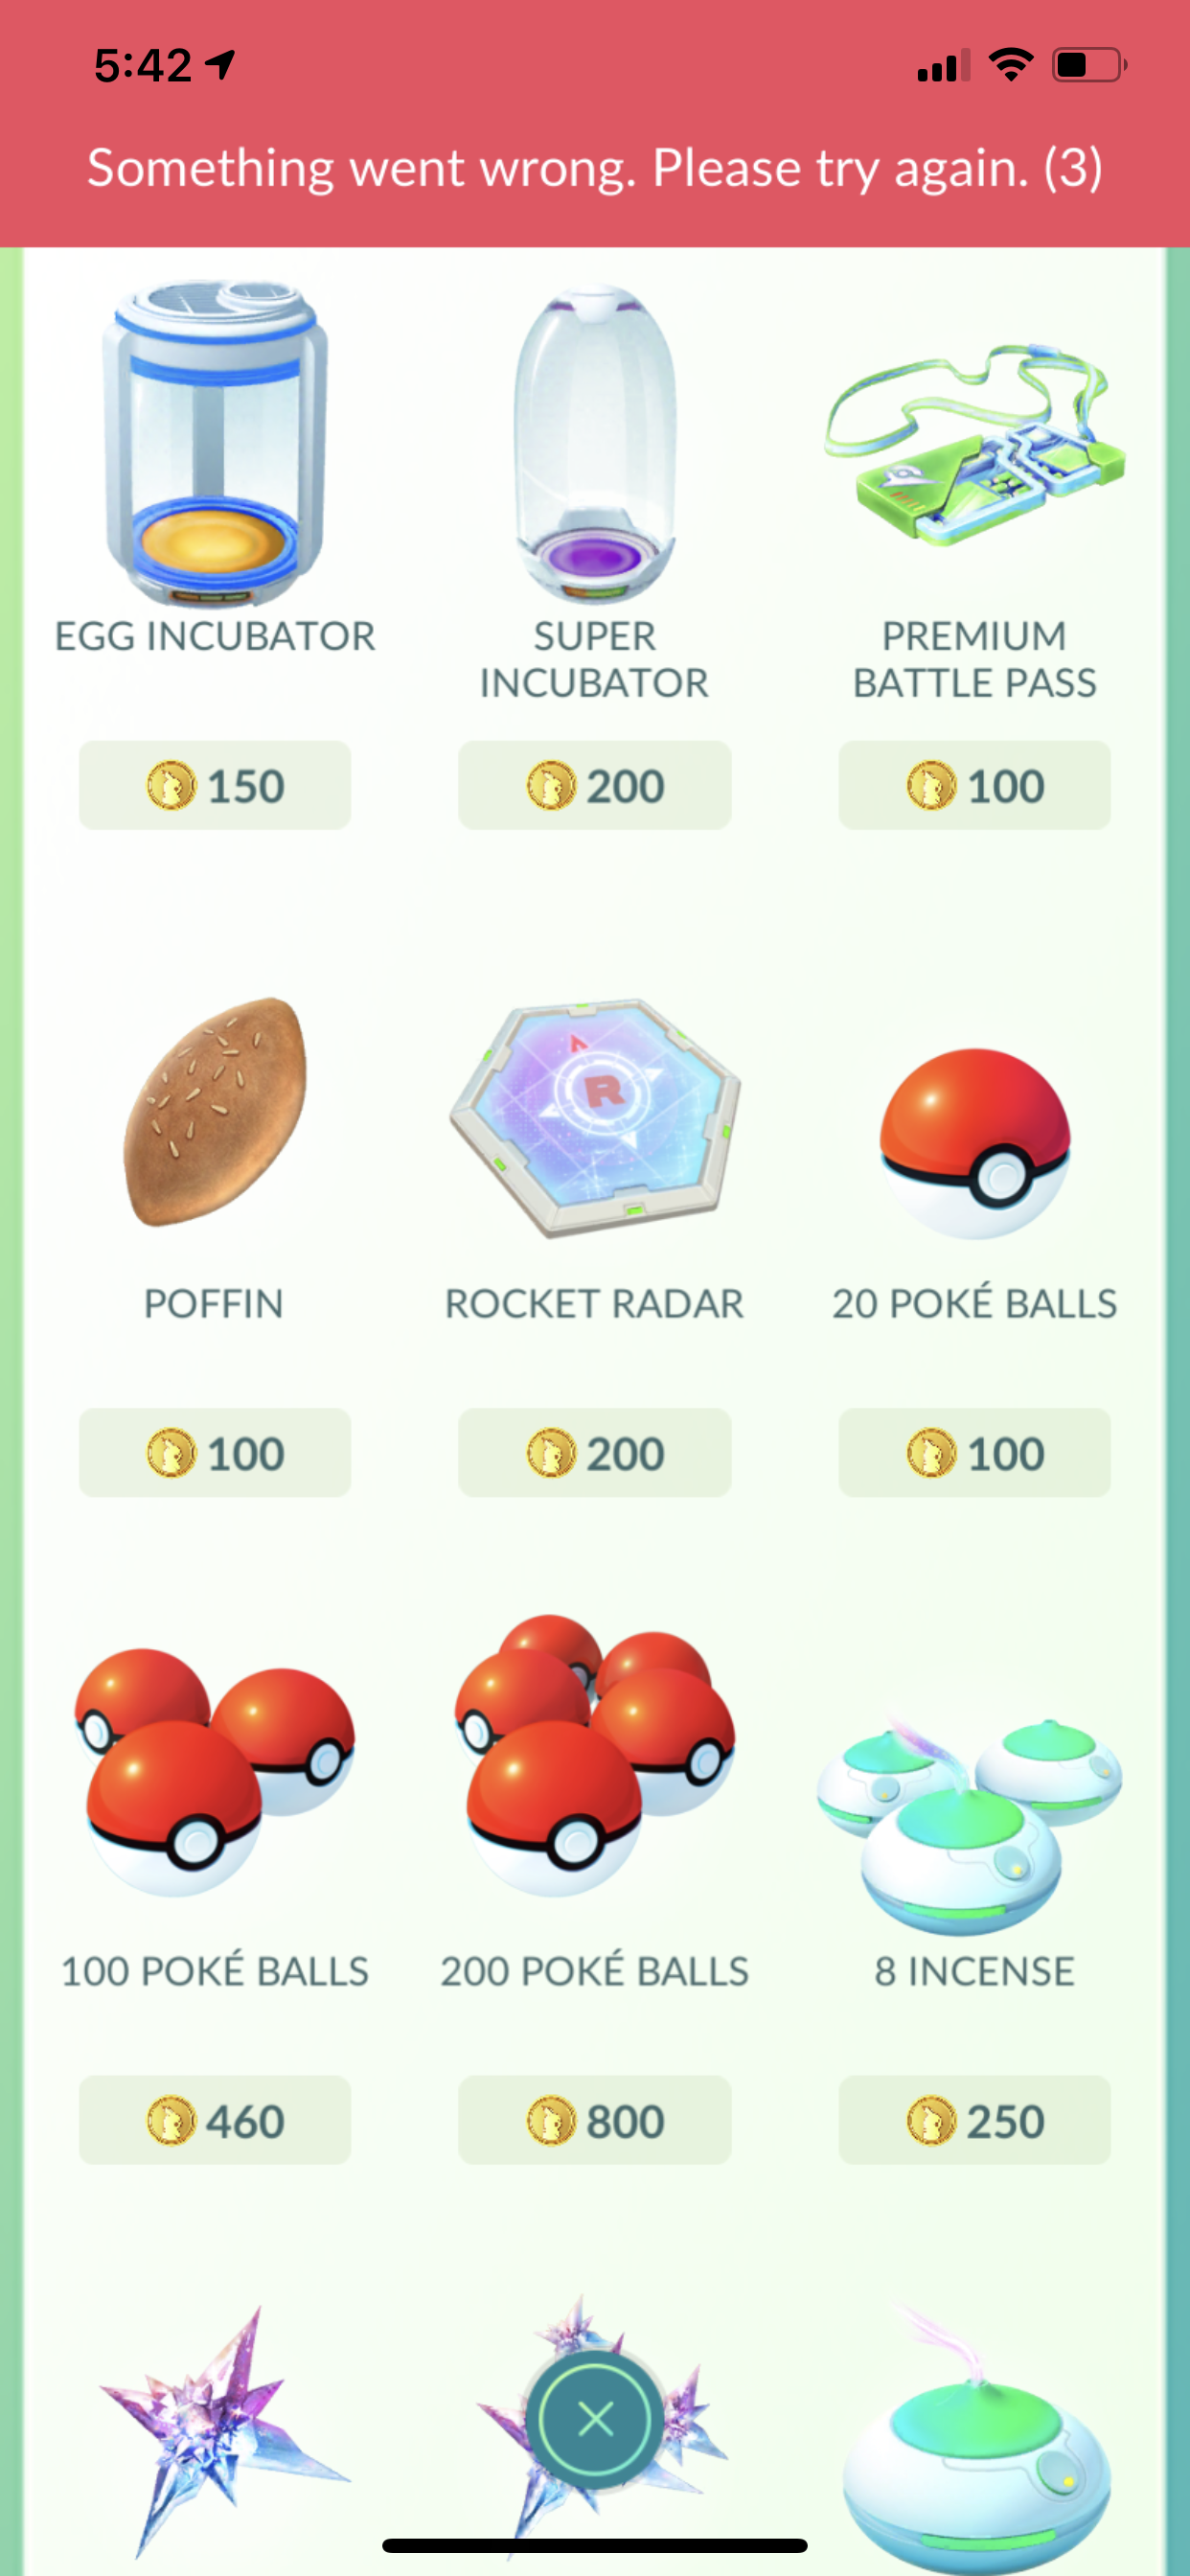 Unable to make purchases in Pokémon GO - Apple Community